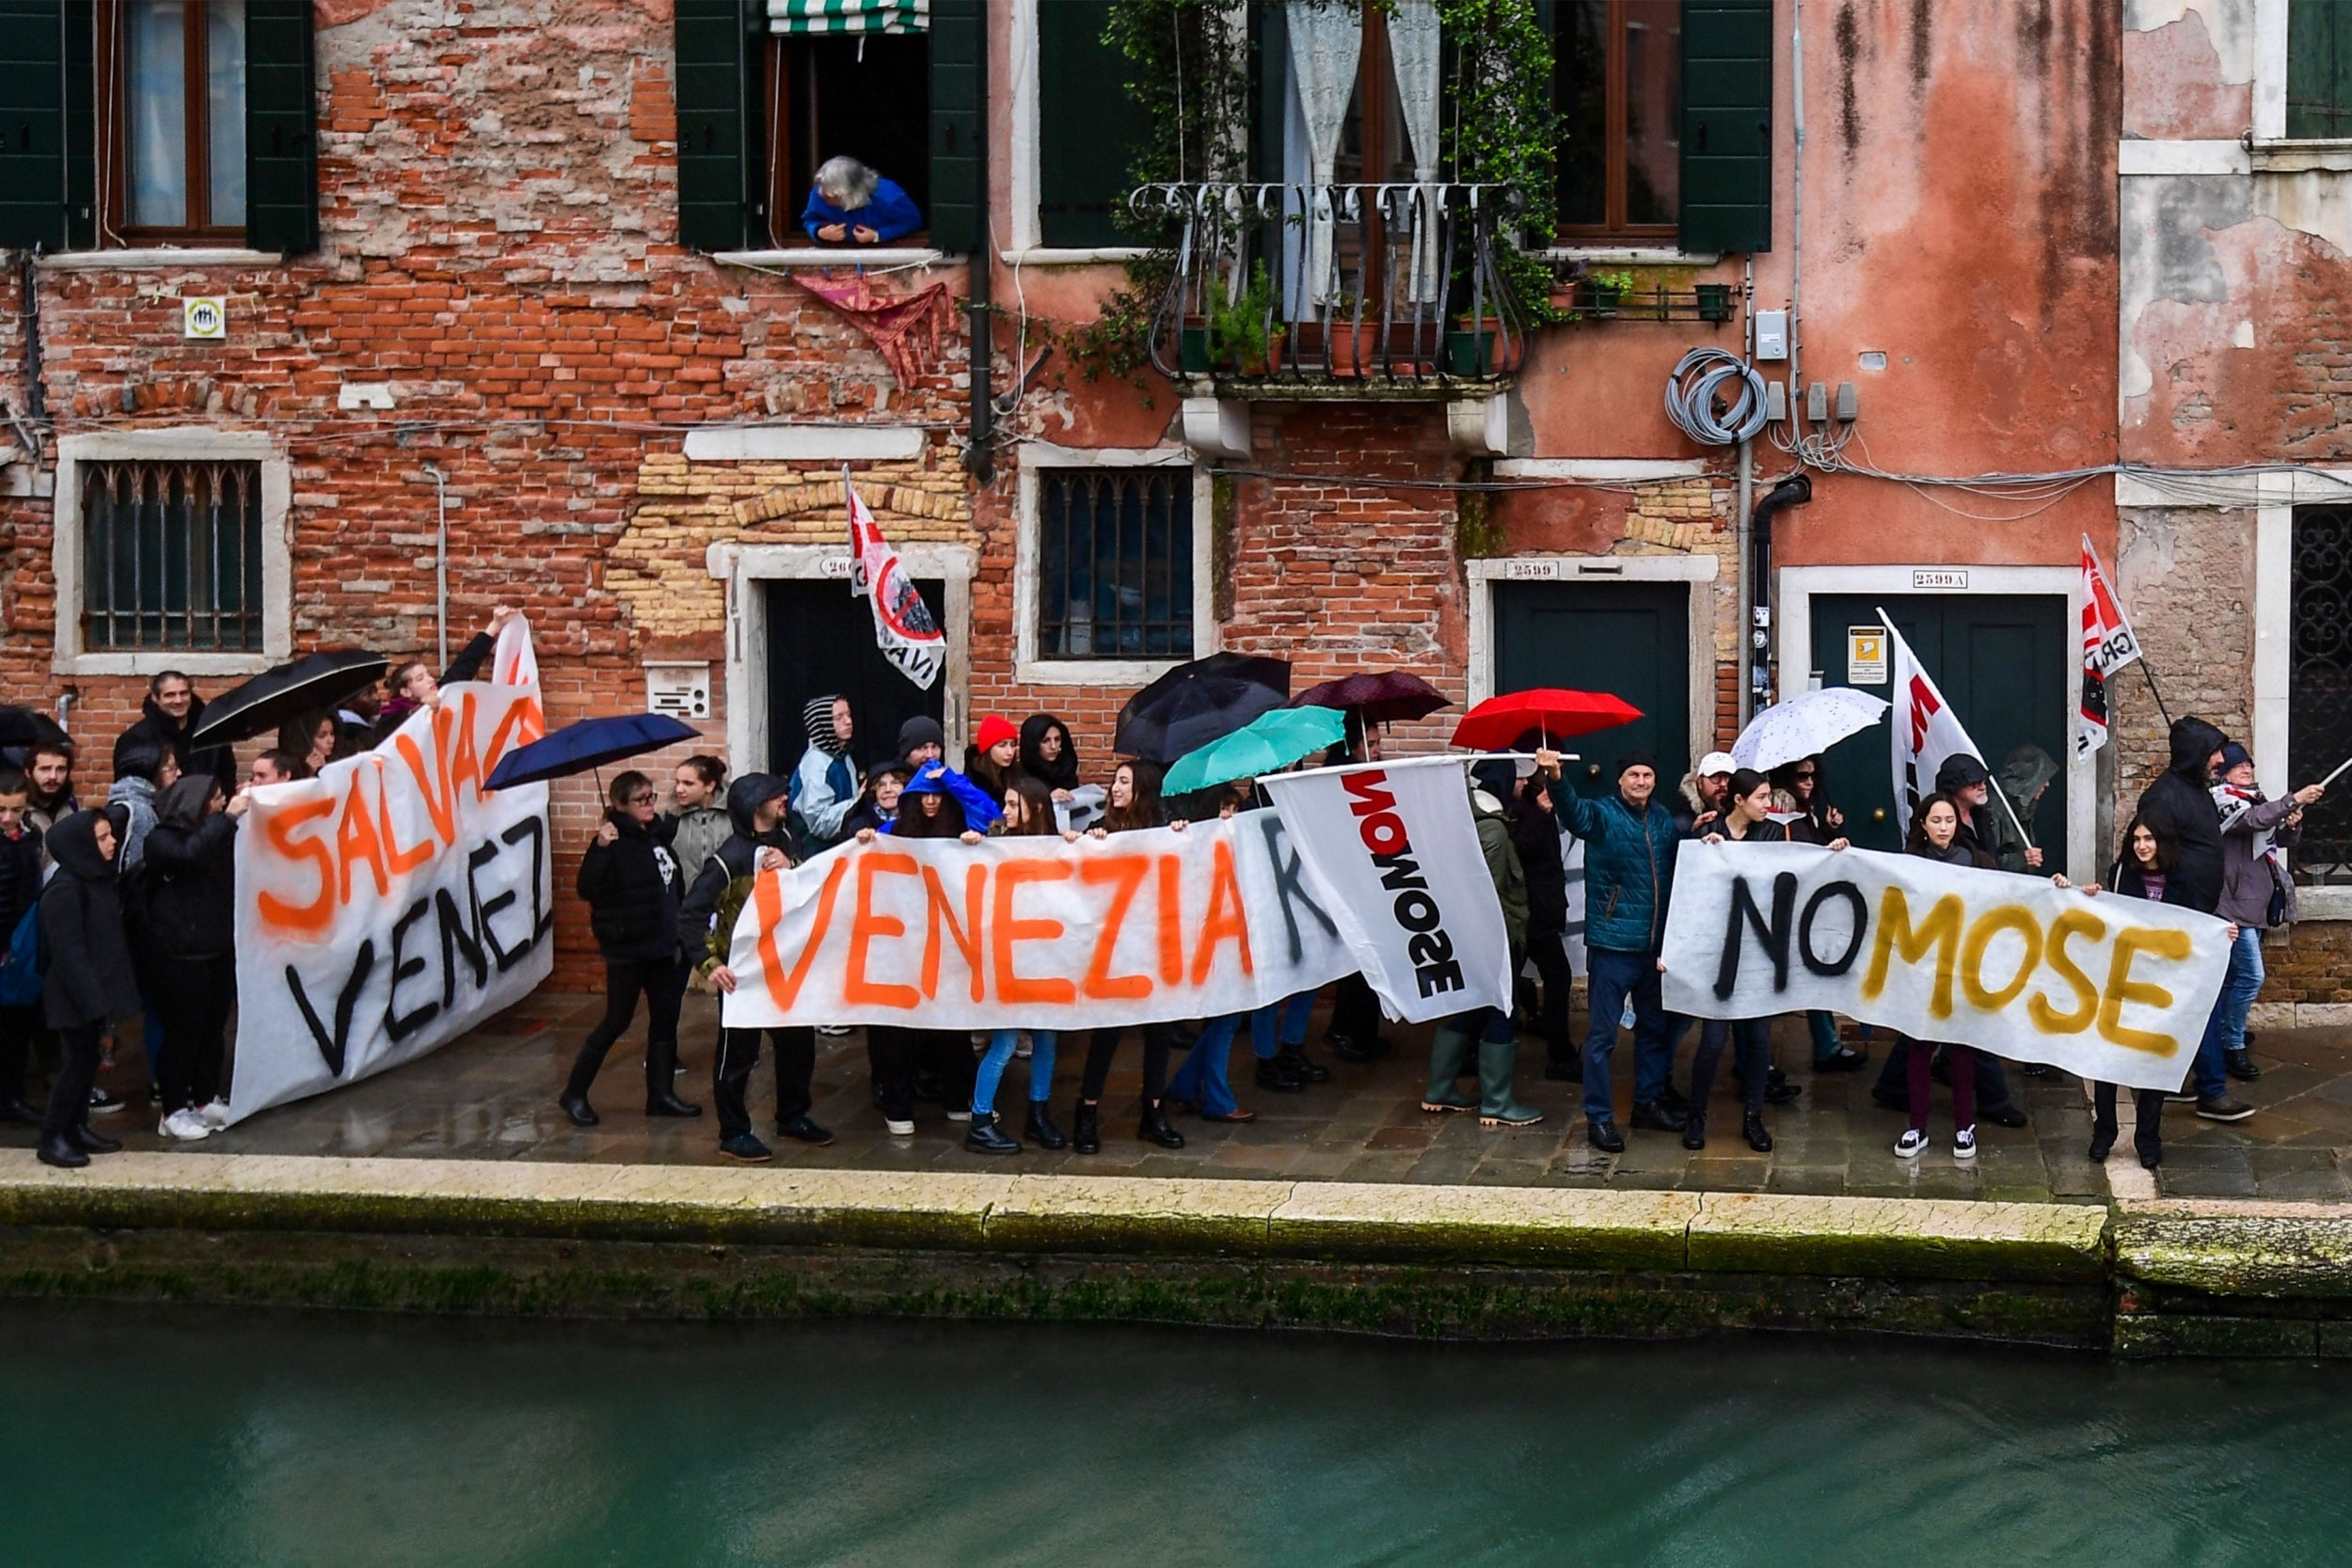 Venice residents protest after severe floods (AFP/Getty)